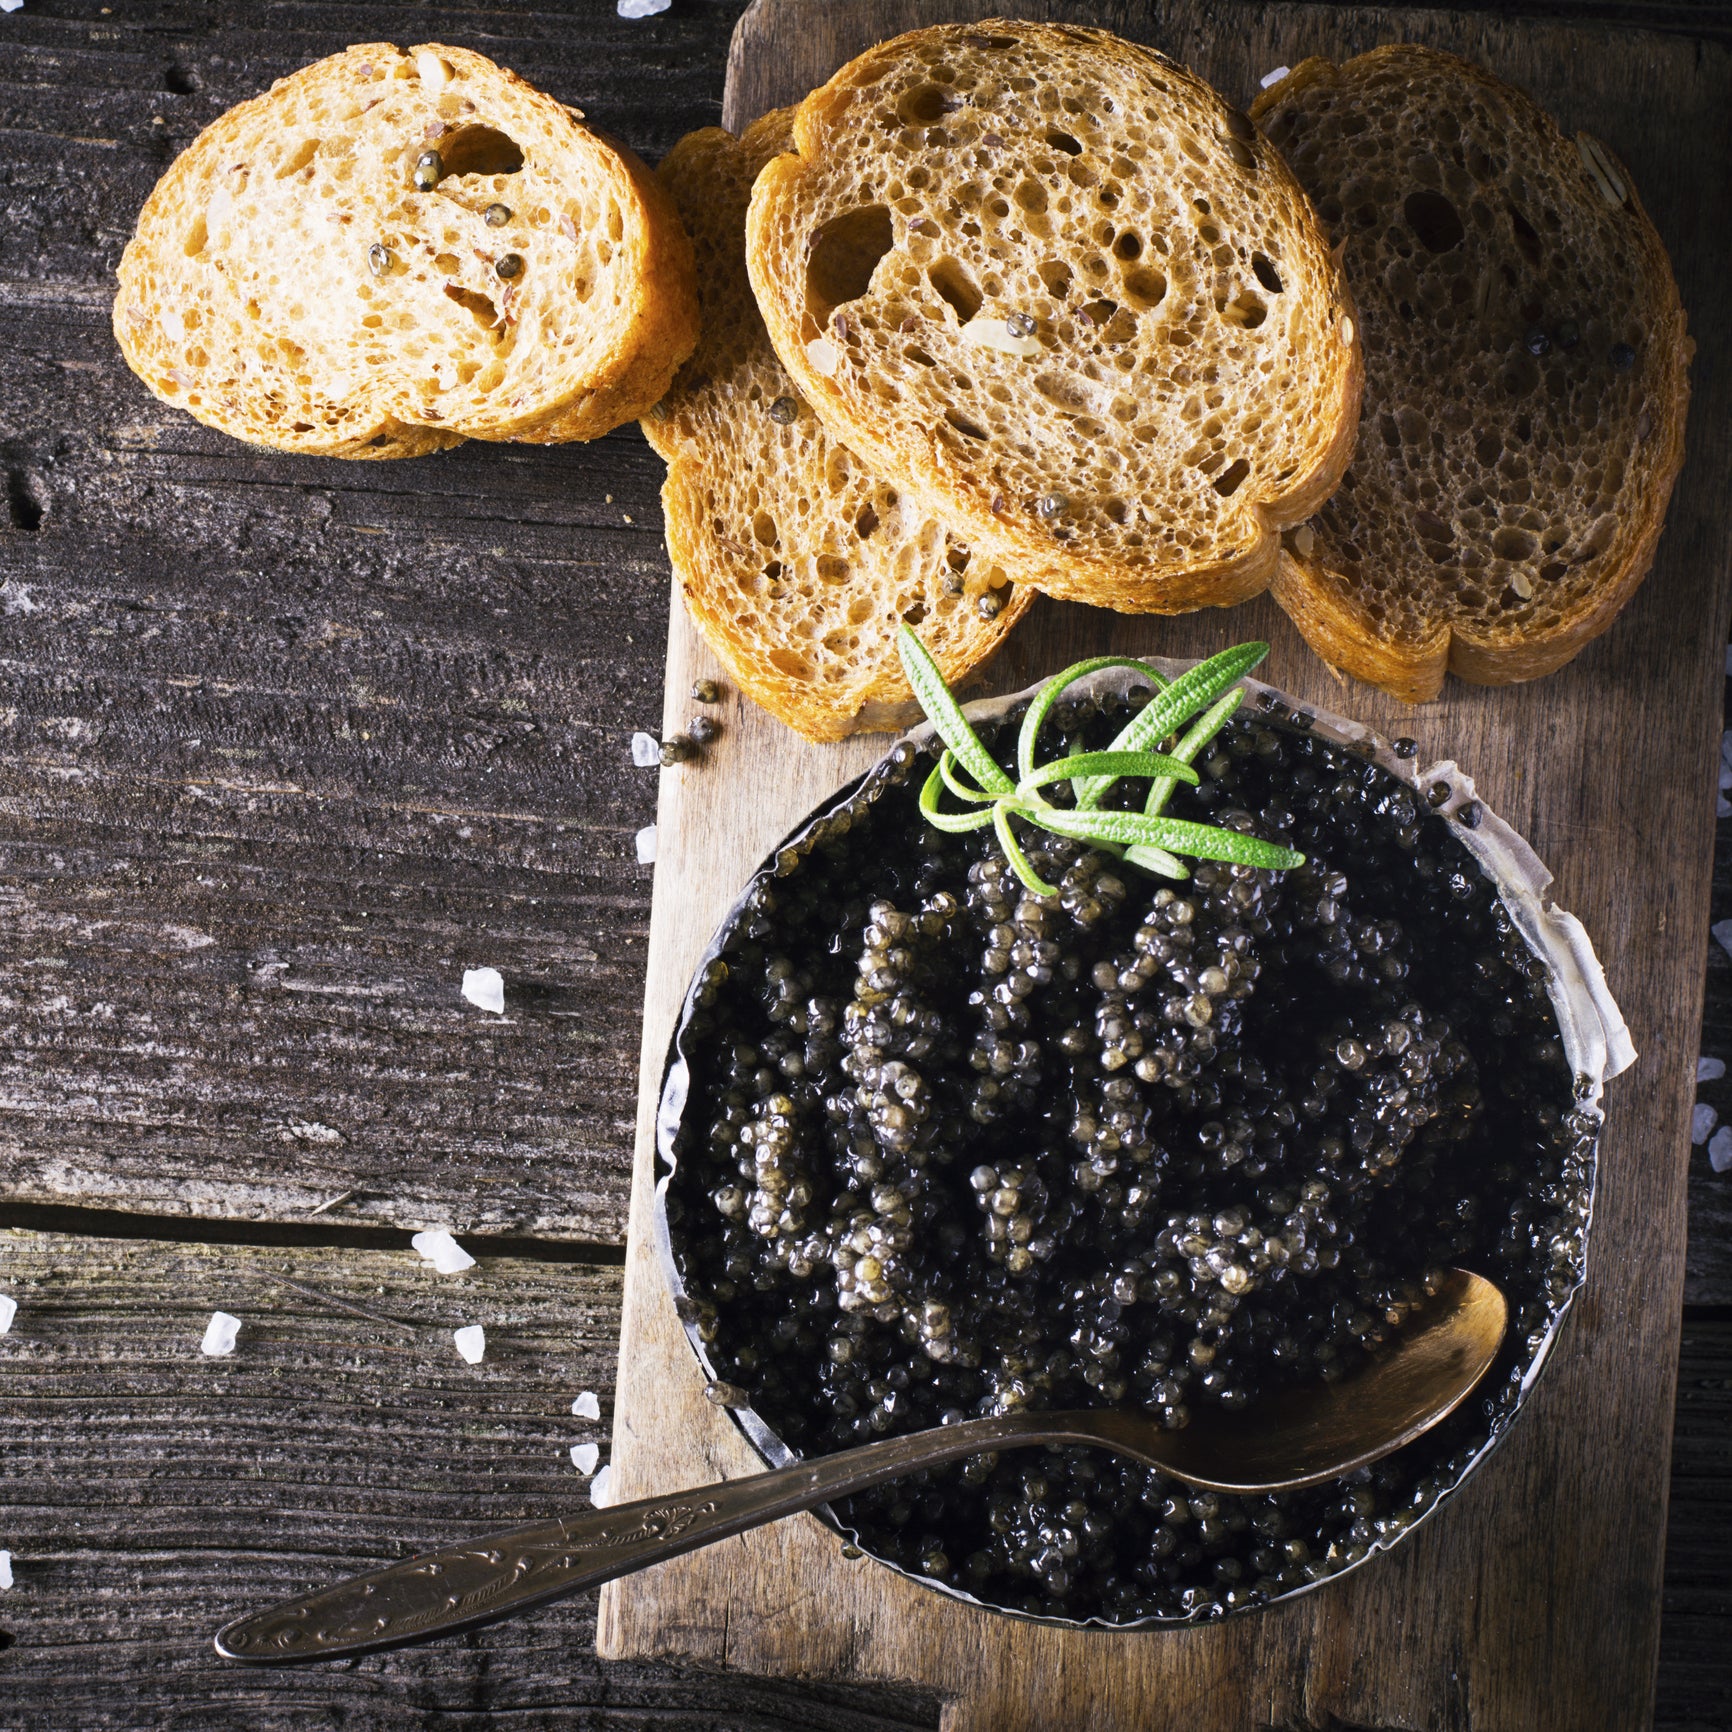 How to Choose the Best Black Caviar